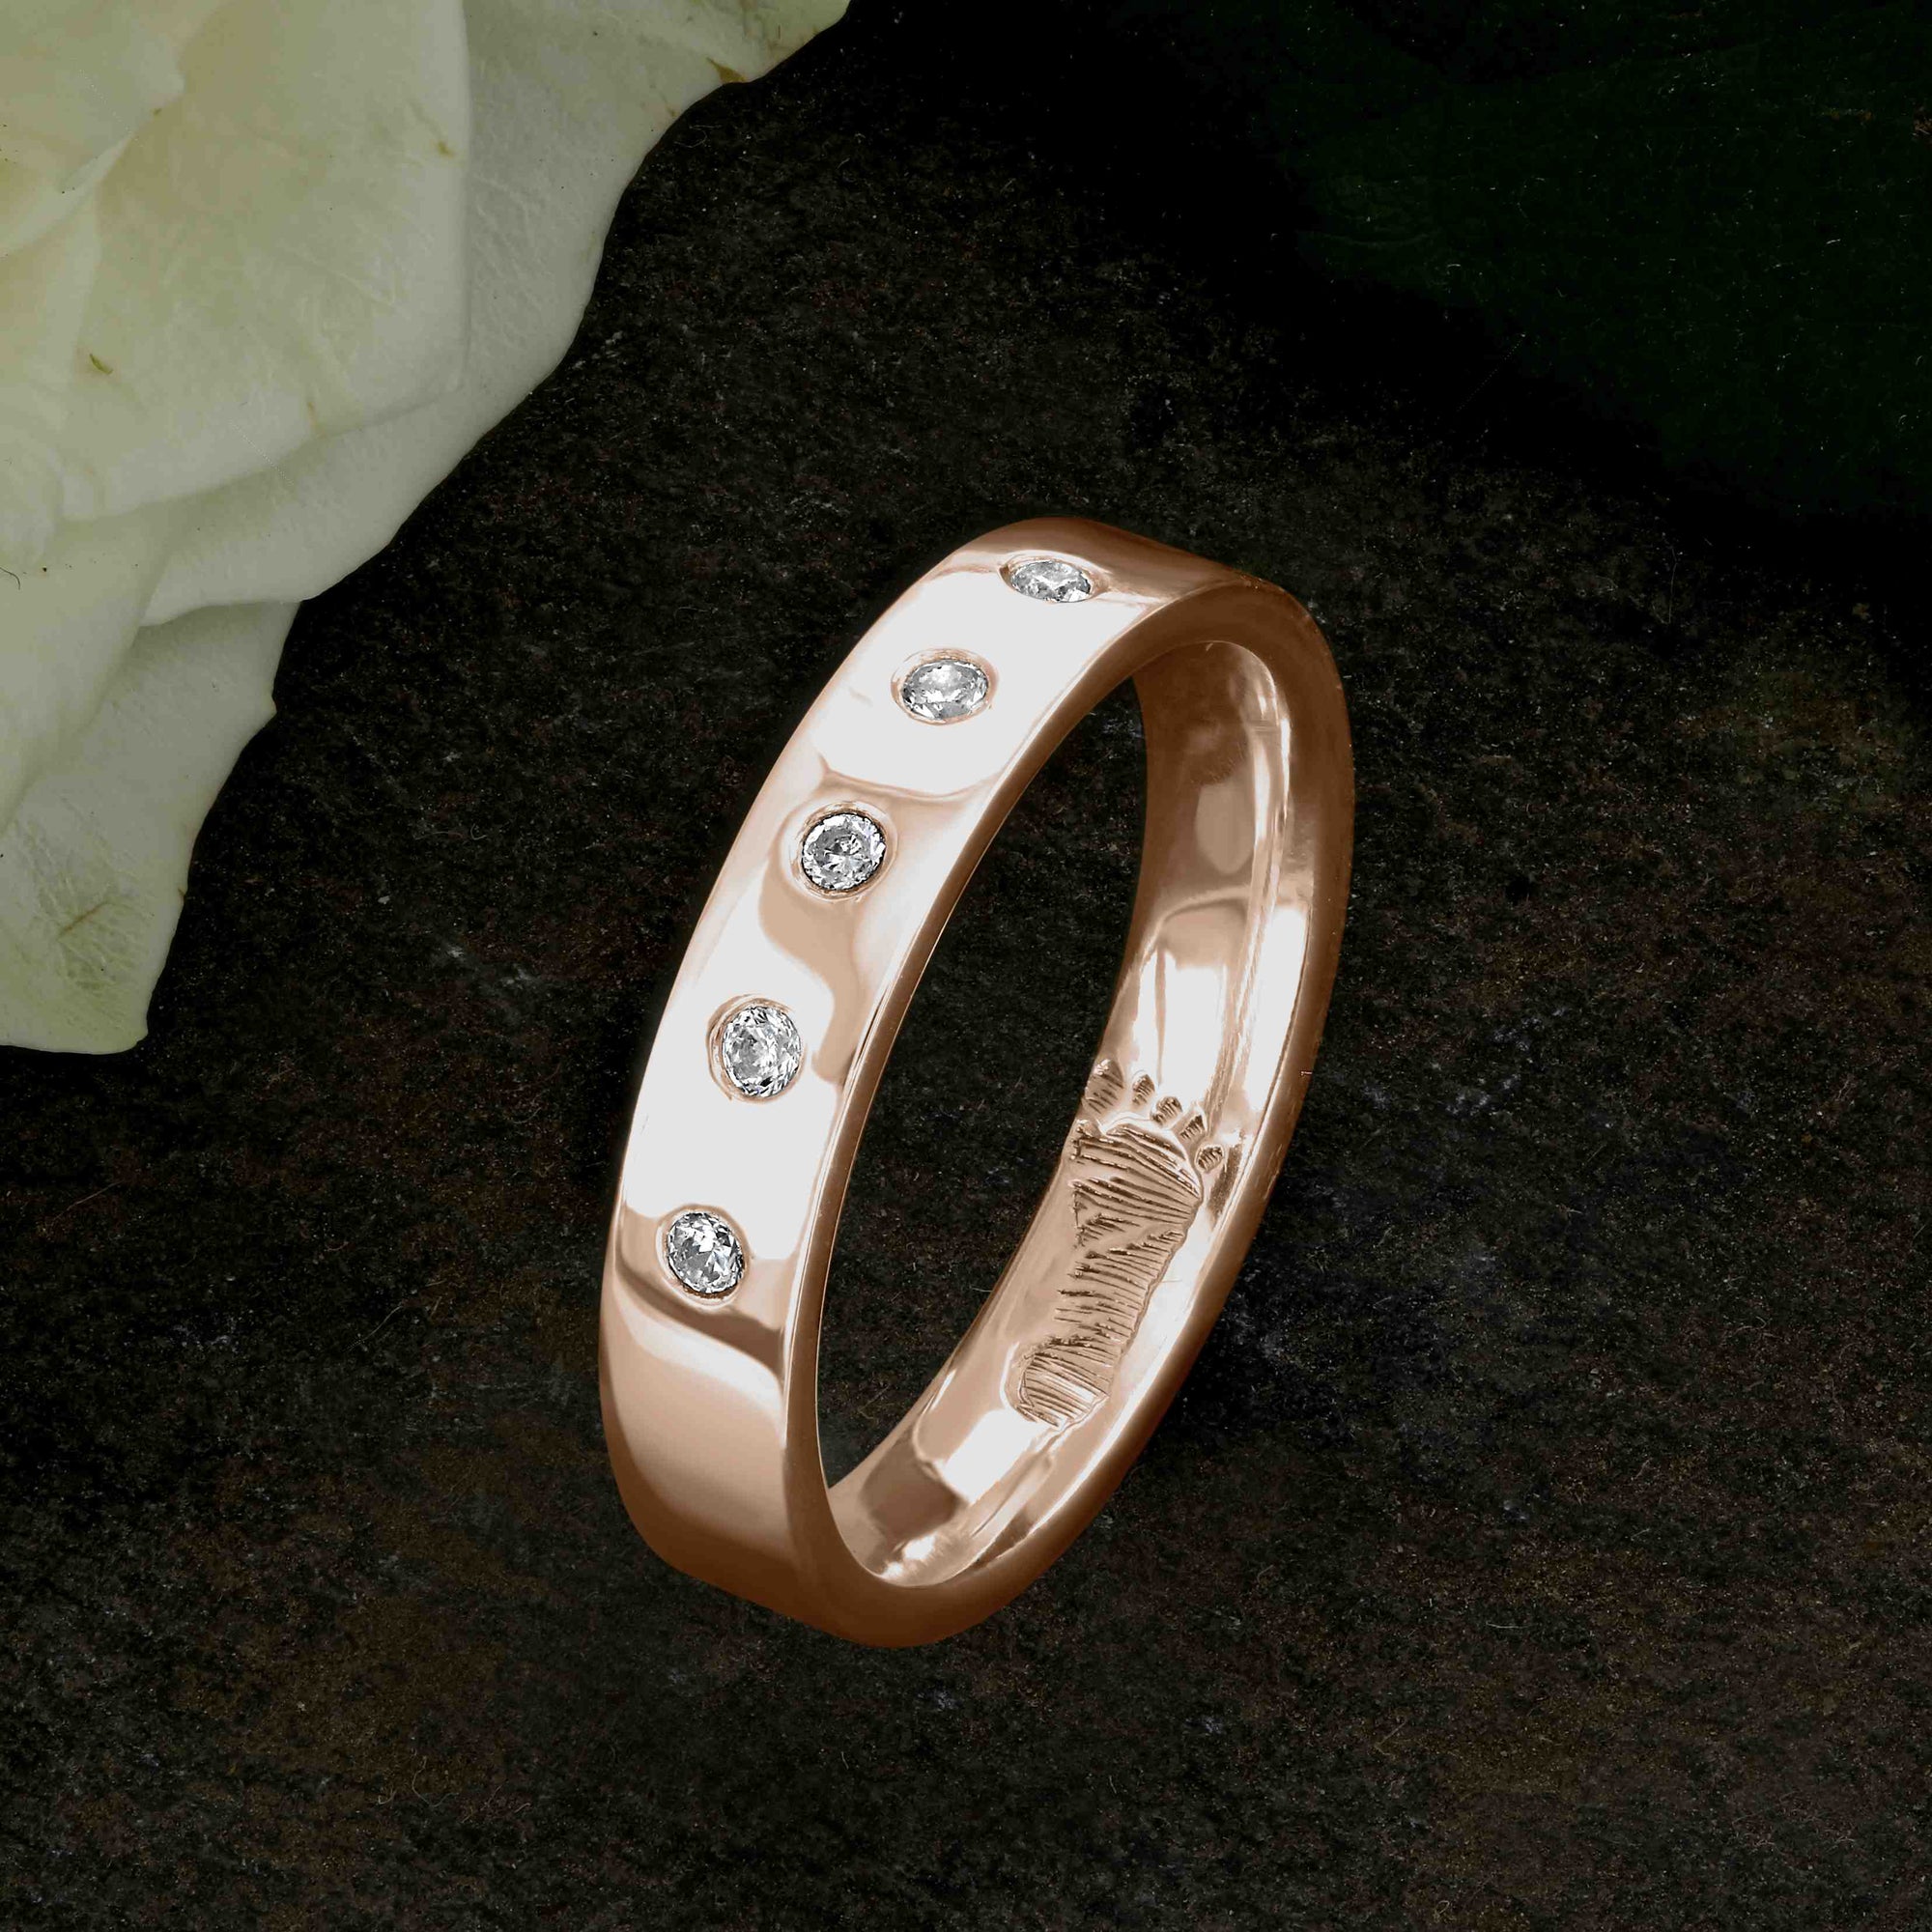 A Rose Gold Wedding Ring with an engraved baby footprint on the inside surface | Set with five beautiful diamonds on the outer surface of the ring | Hand engraving | Ladies slim 4mm wide, comfort flat-court profile ring | Custom personalised wedding jewellery | Sophia Alexander Fingerprint Jewellery | Handmade in Suffolk UK